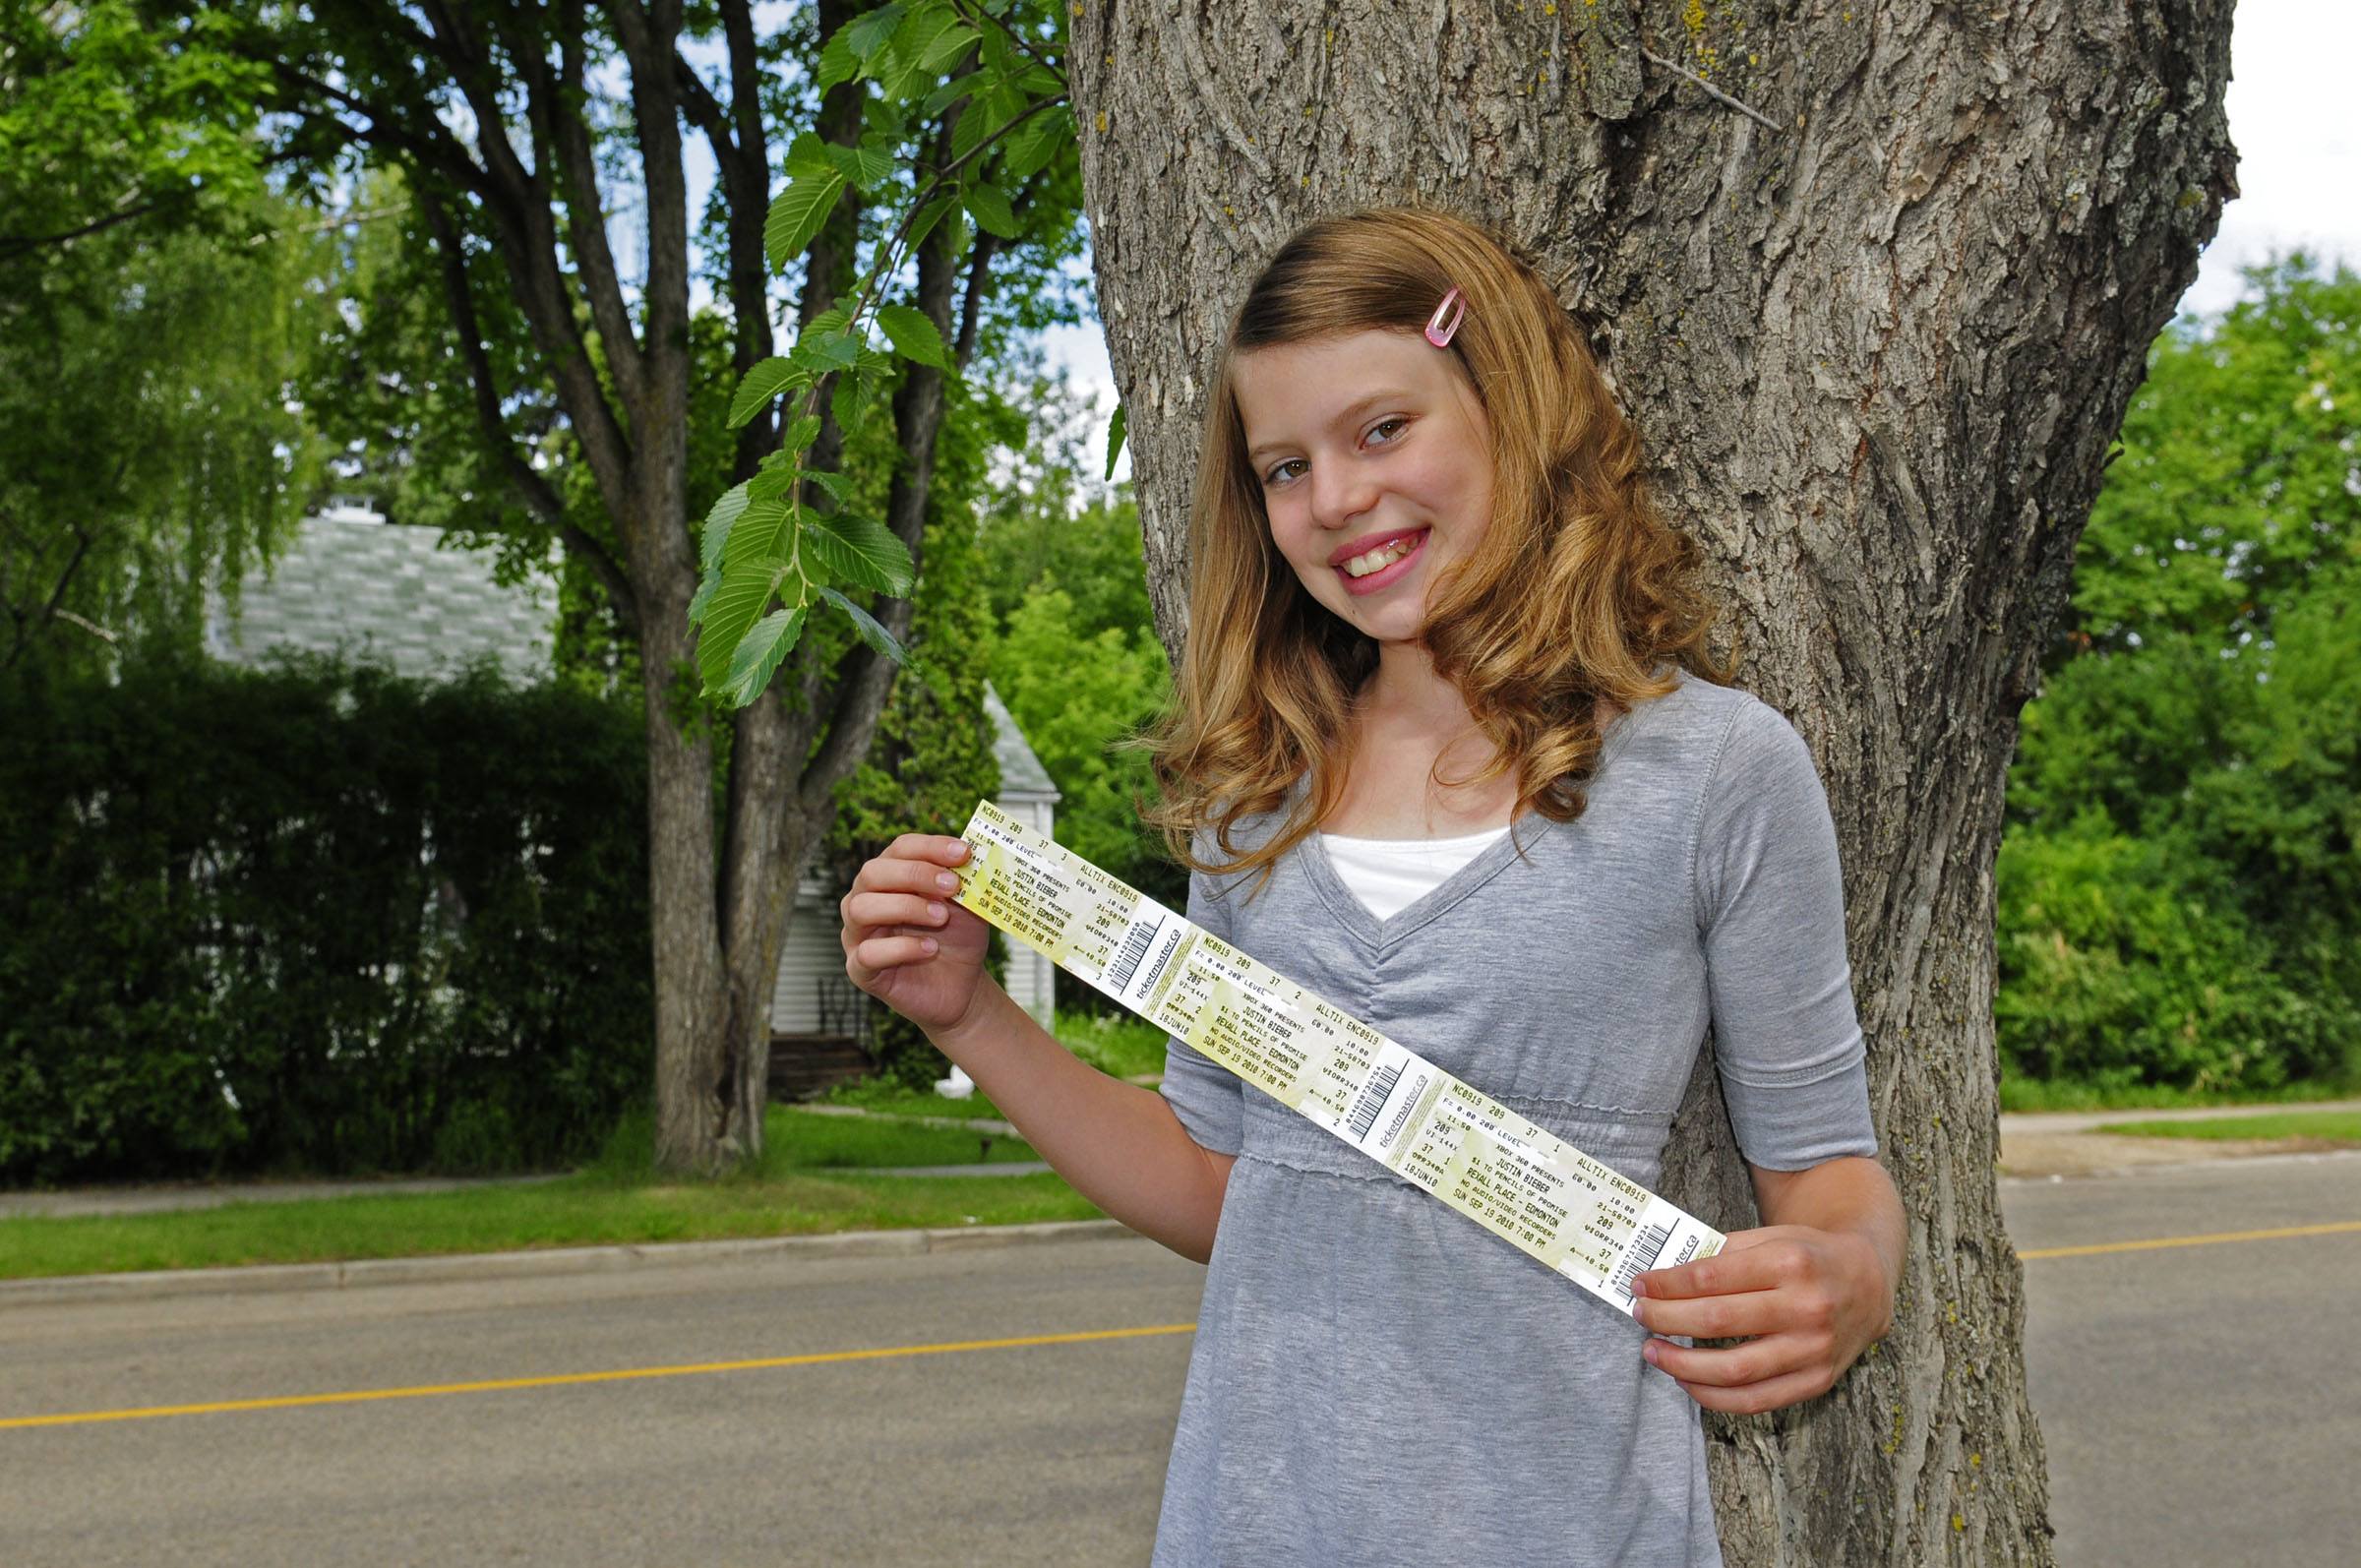 Natasha Walz of Red Deer donated her Justin Bieber concert tickets to the Learning Disabilities Association of Alberta for a fundraising raffle. The anonymous purchaser returned them to her so she can attend the concert after all.